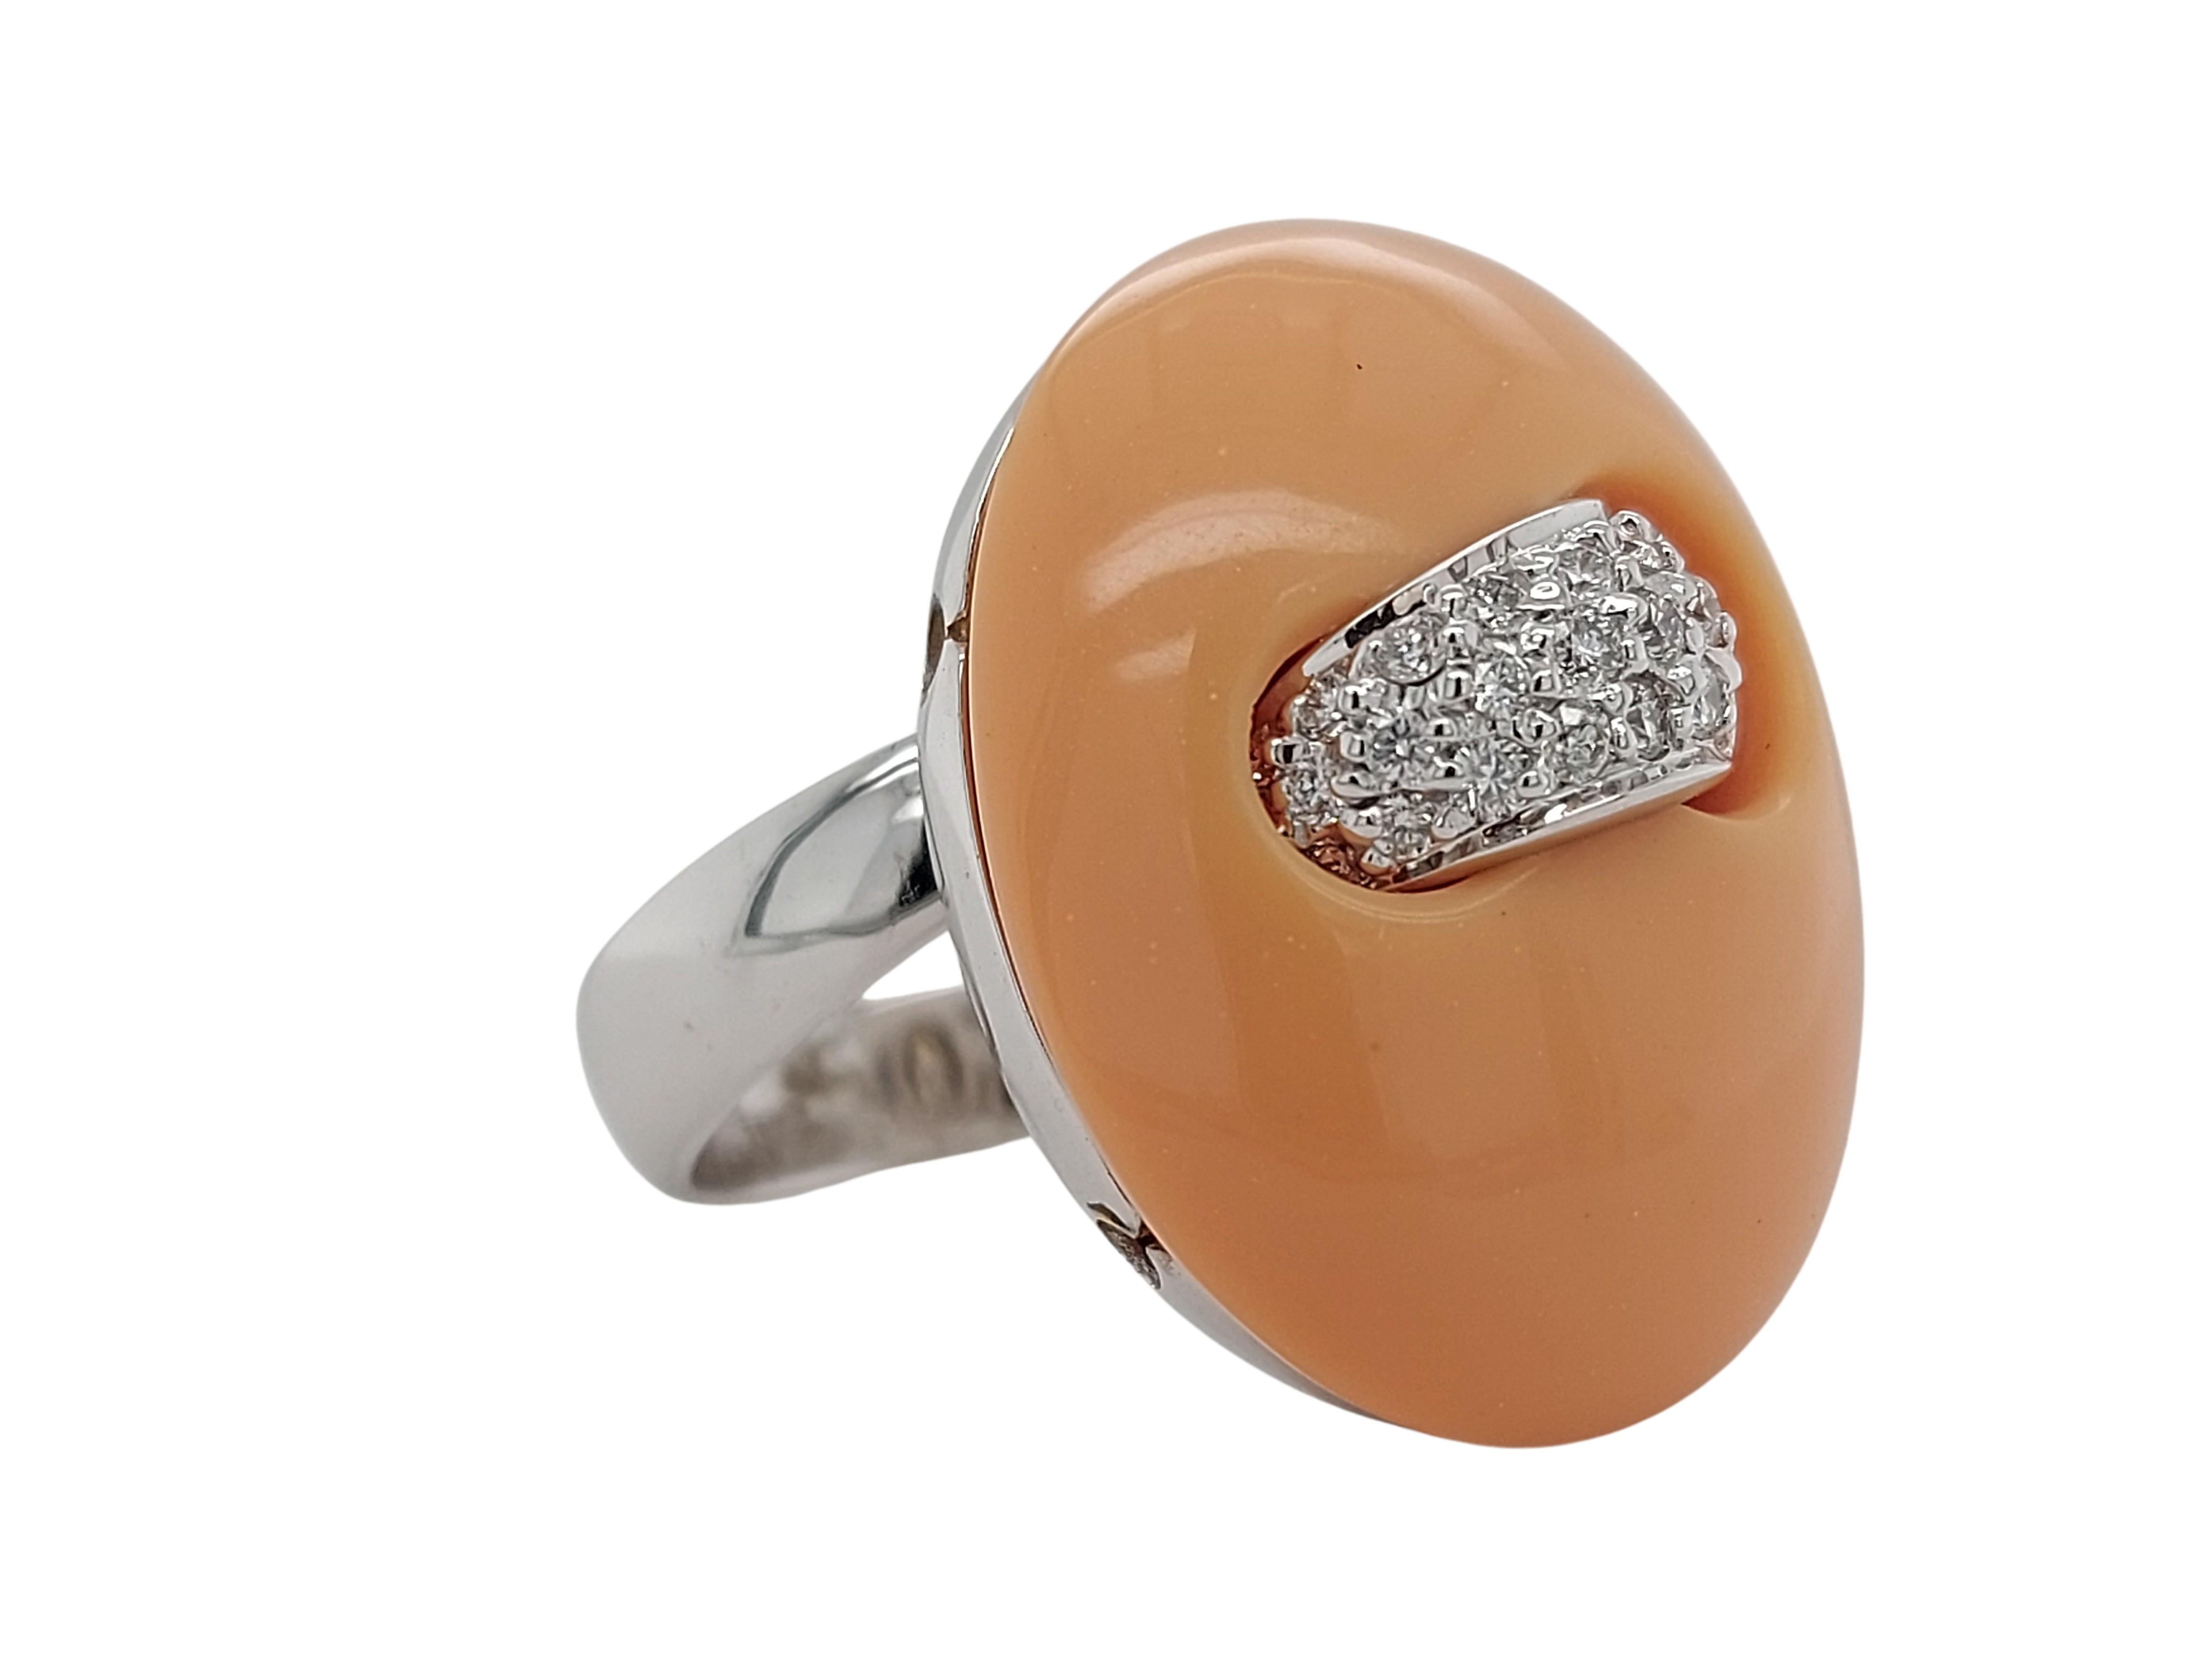 Beautiful Talento Italiano ring with big coral natural stone and diamonds

Diamonds: 20 brilliant cut diamonds approx. 0.31ct F/G, VVS

Coral: Natural

Material: 18kt White gold

Total weight: 14.2 grams / 0,500 oz / 9.1 dwt

Ring size: 55.1 EU /